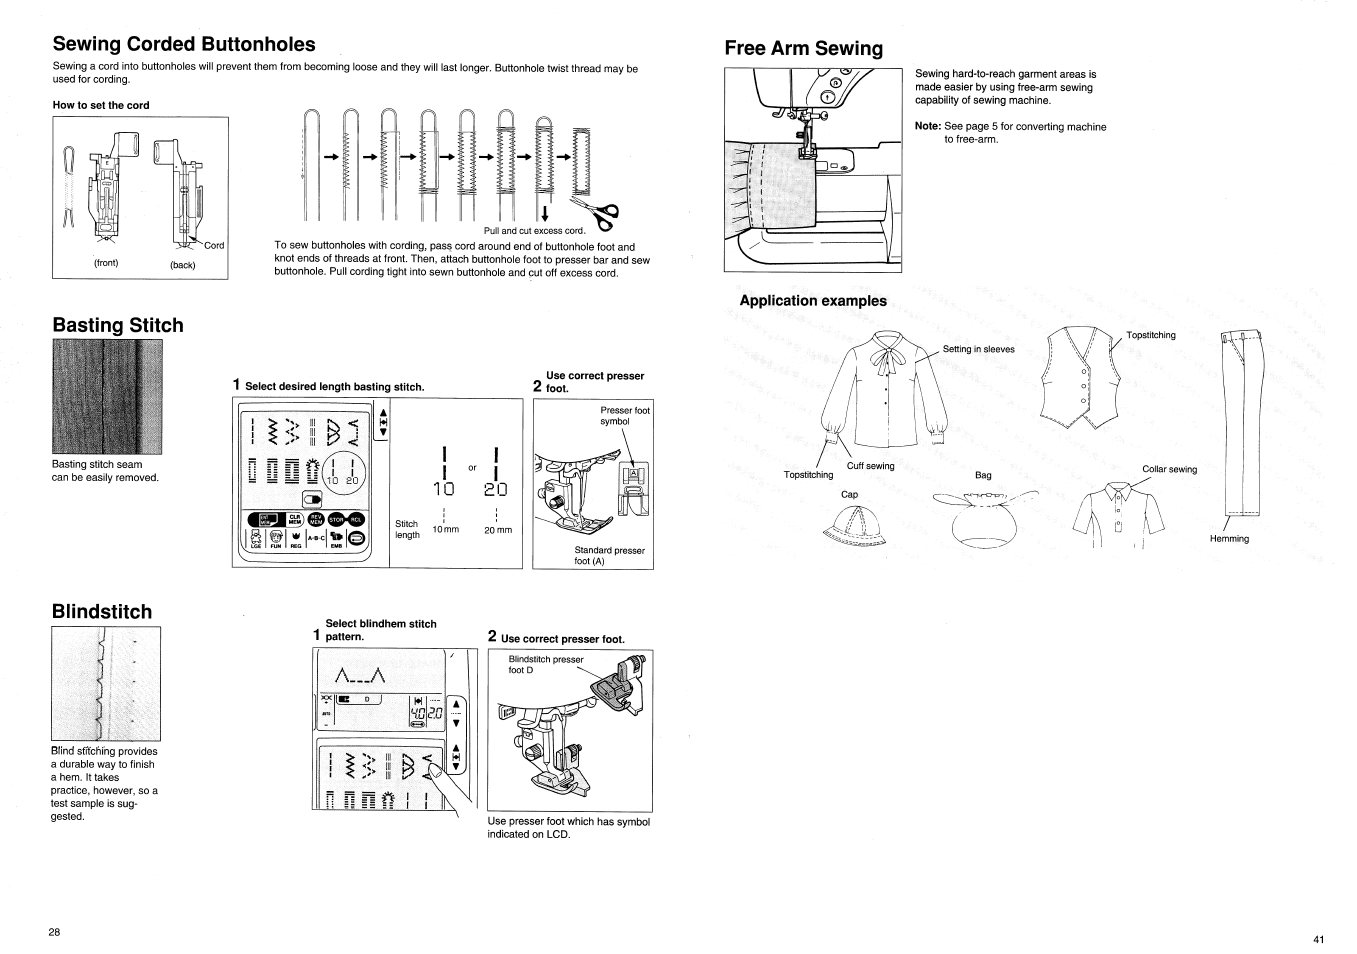 Free arm sewing, Application examples | SINGER XL100 Quantum User Manual | Page 43 / 72